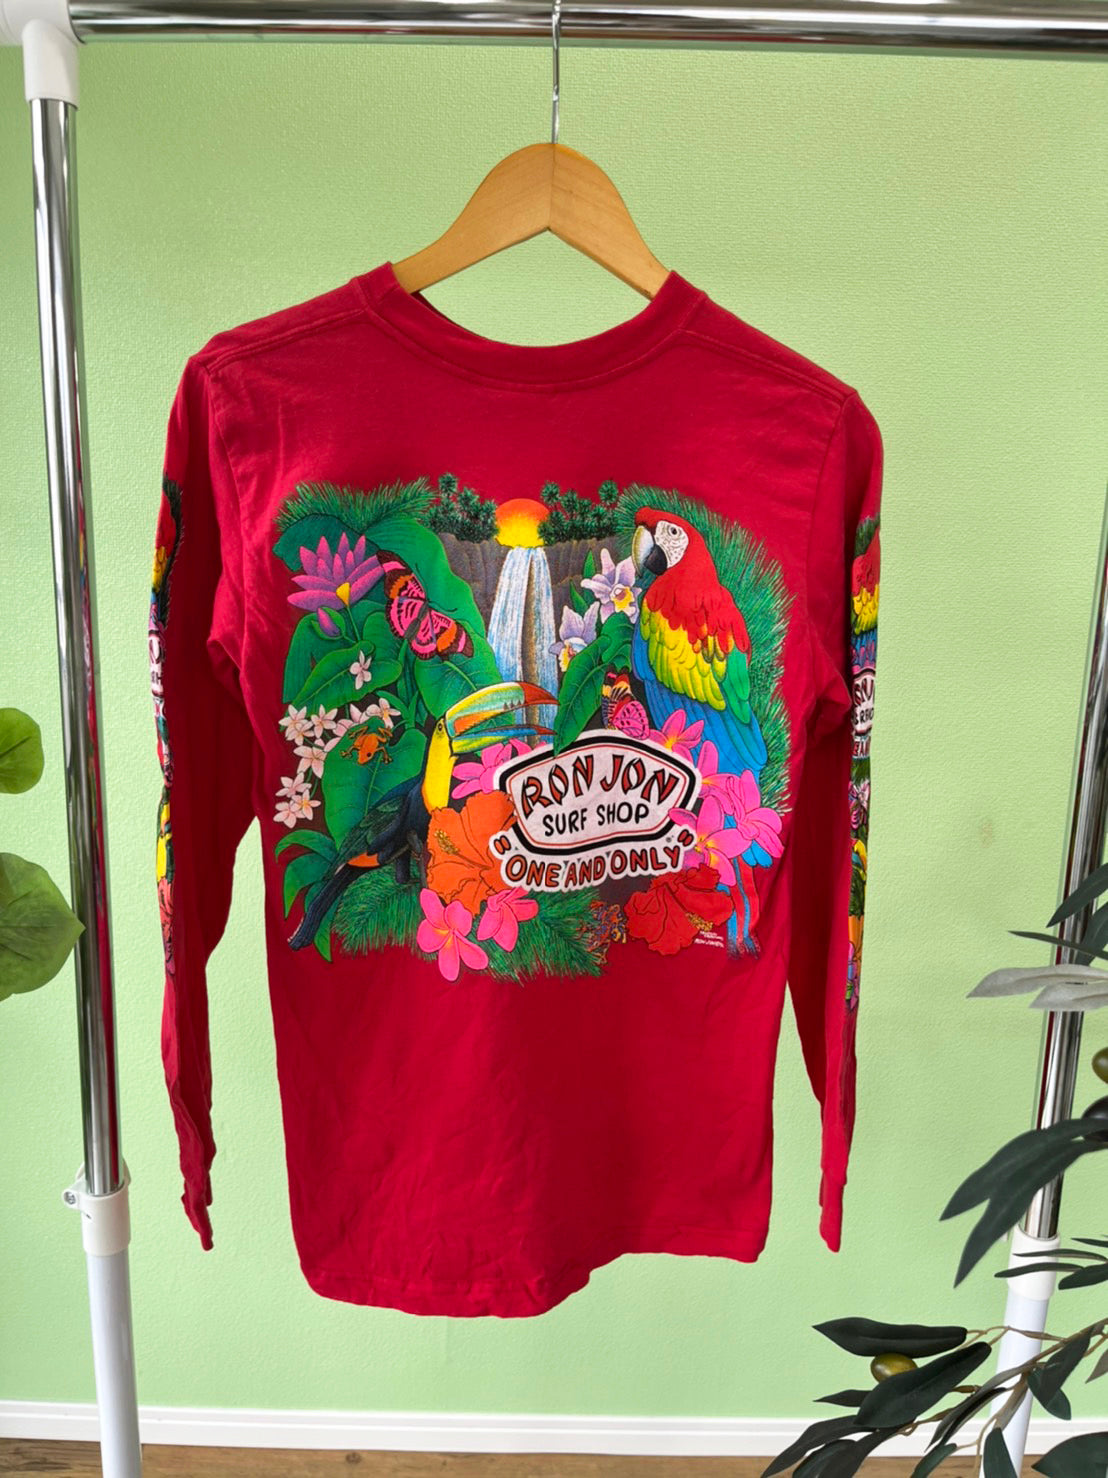 【RON JON】90's RonJon Surf Shop ONE AND ONLY Long sleeve  T-Shirt  （men's S)